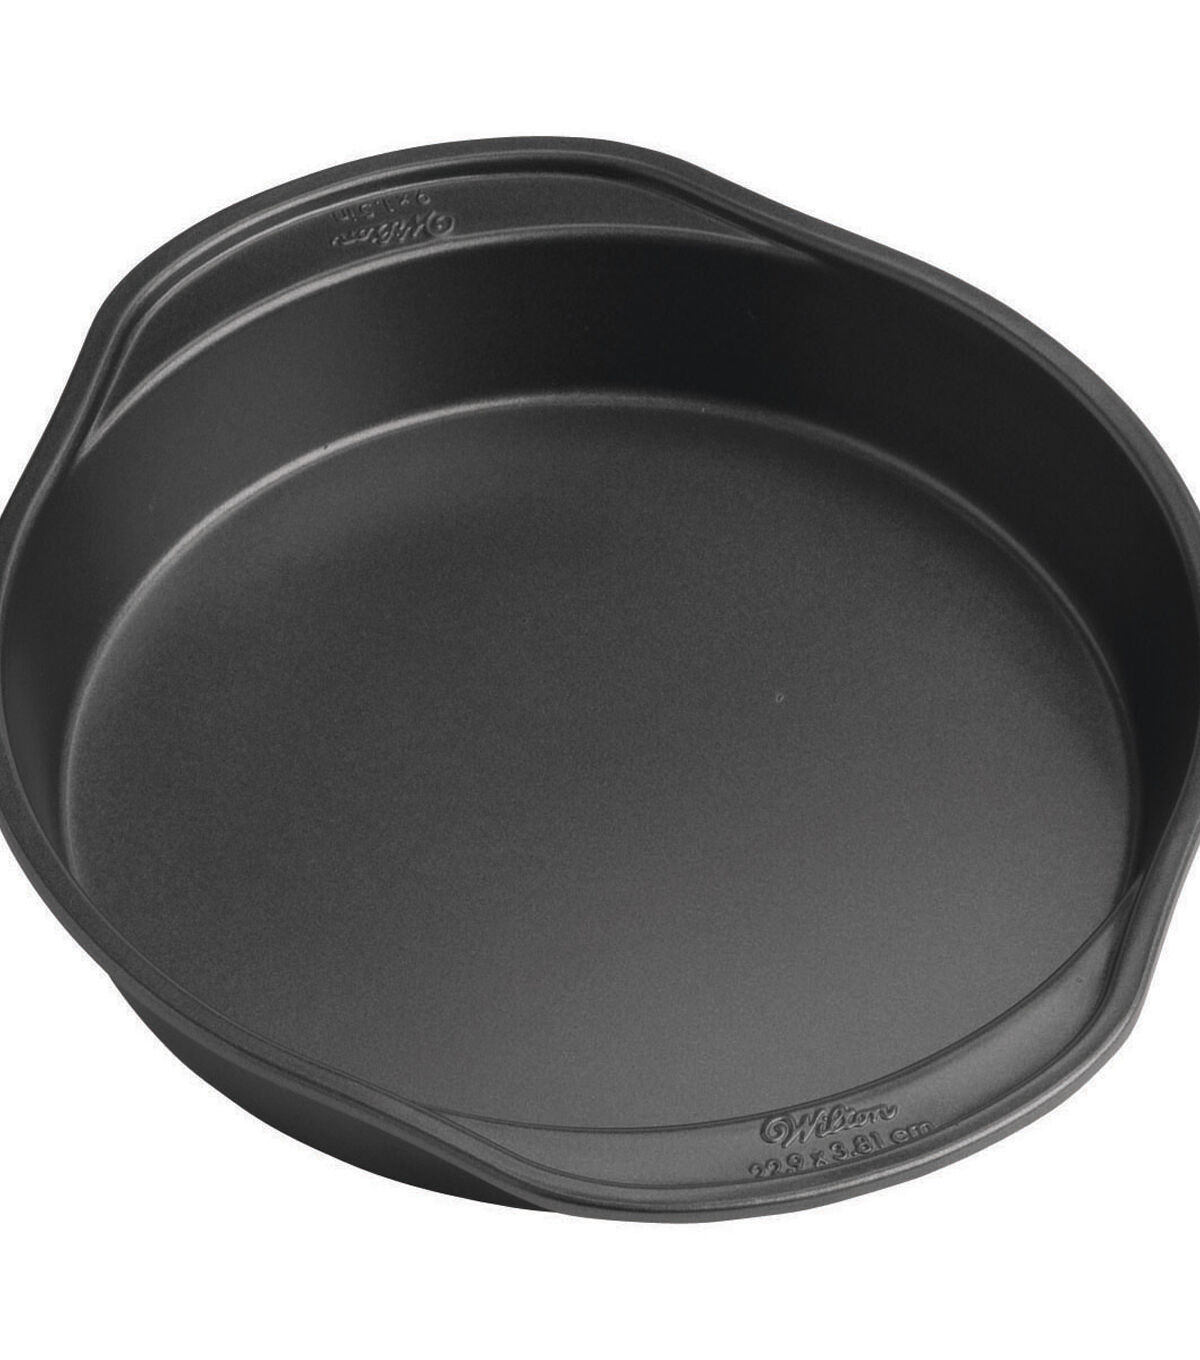 Cuisinart Easy Grip Bakeware 13-Inch by 9-Inch Cake India | Ubuy